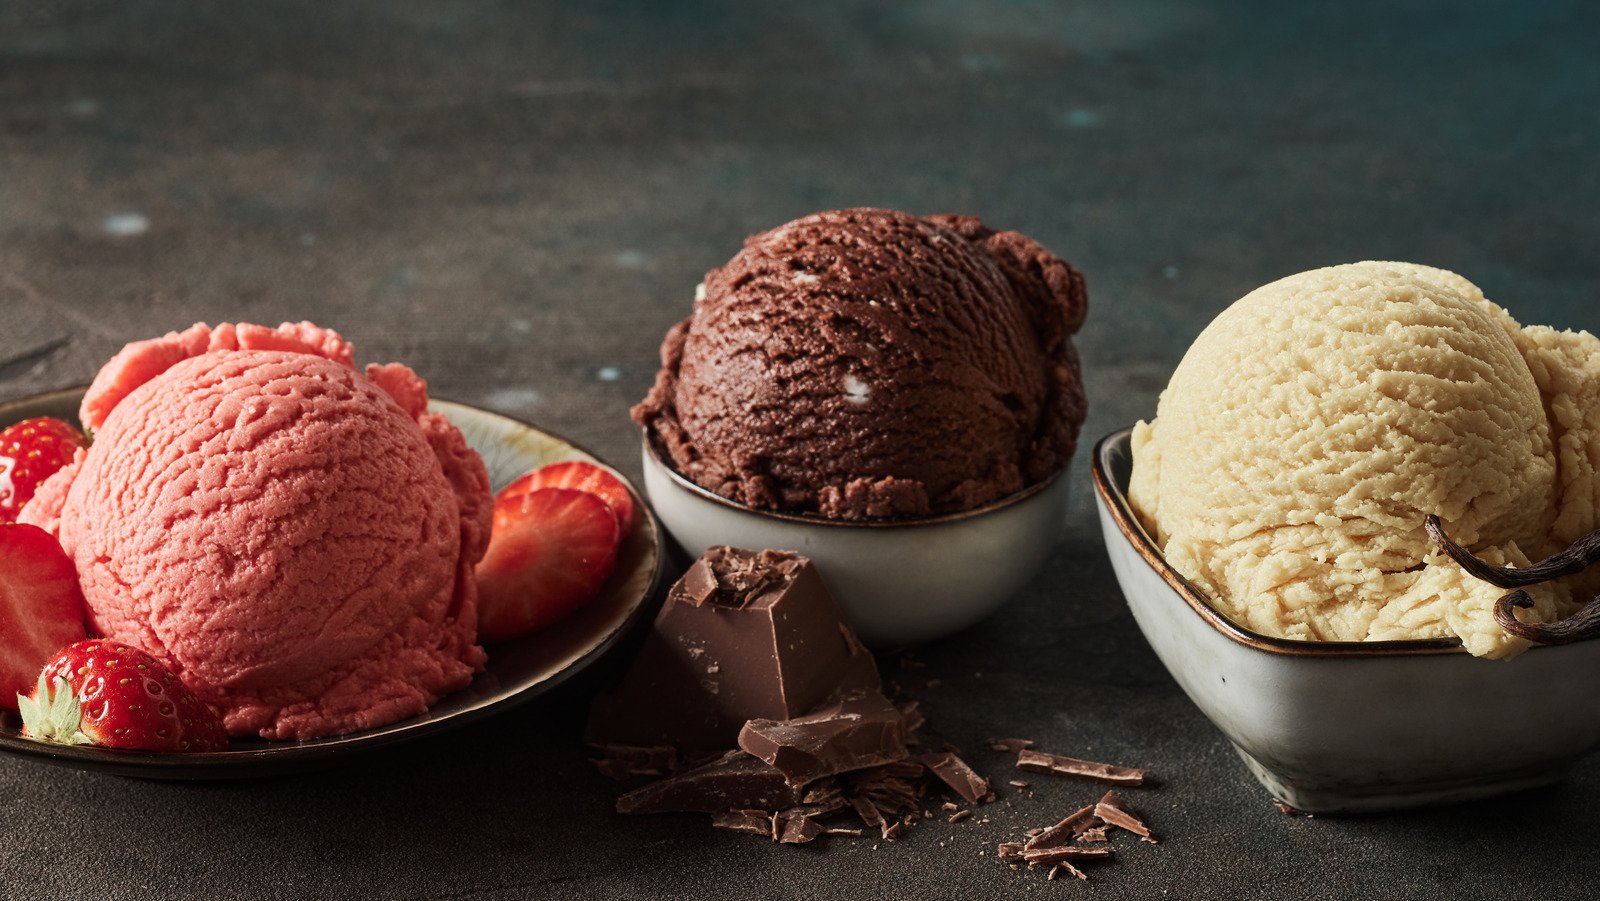 The Most Important Thing To Look For When Buying Gelato